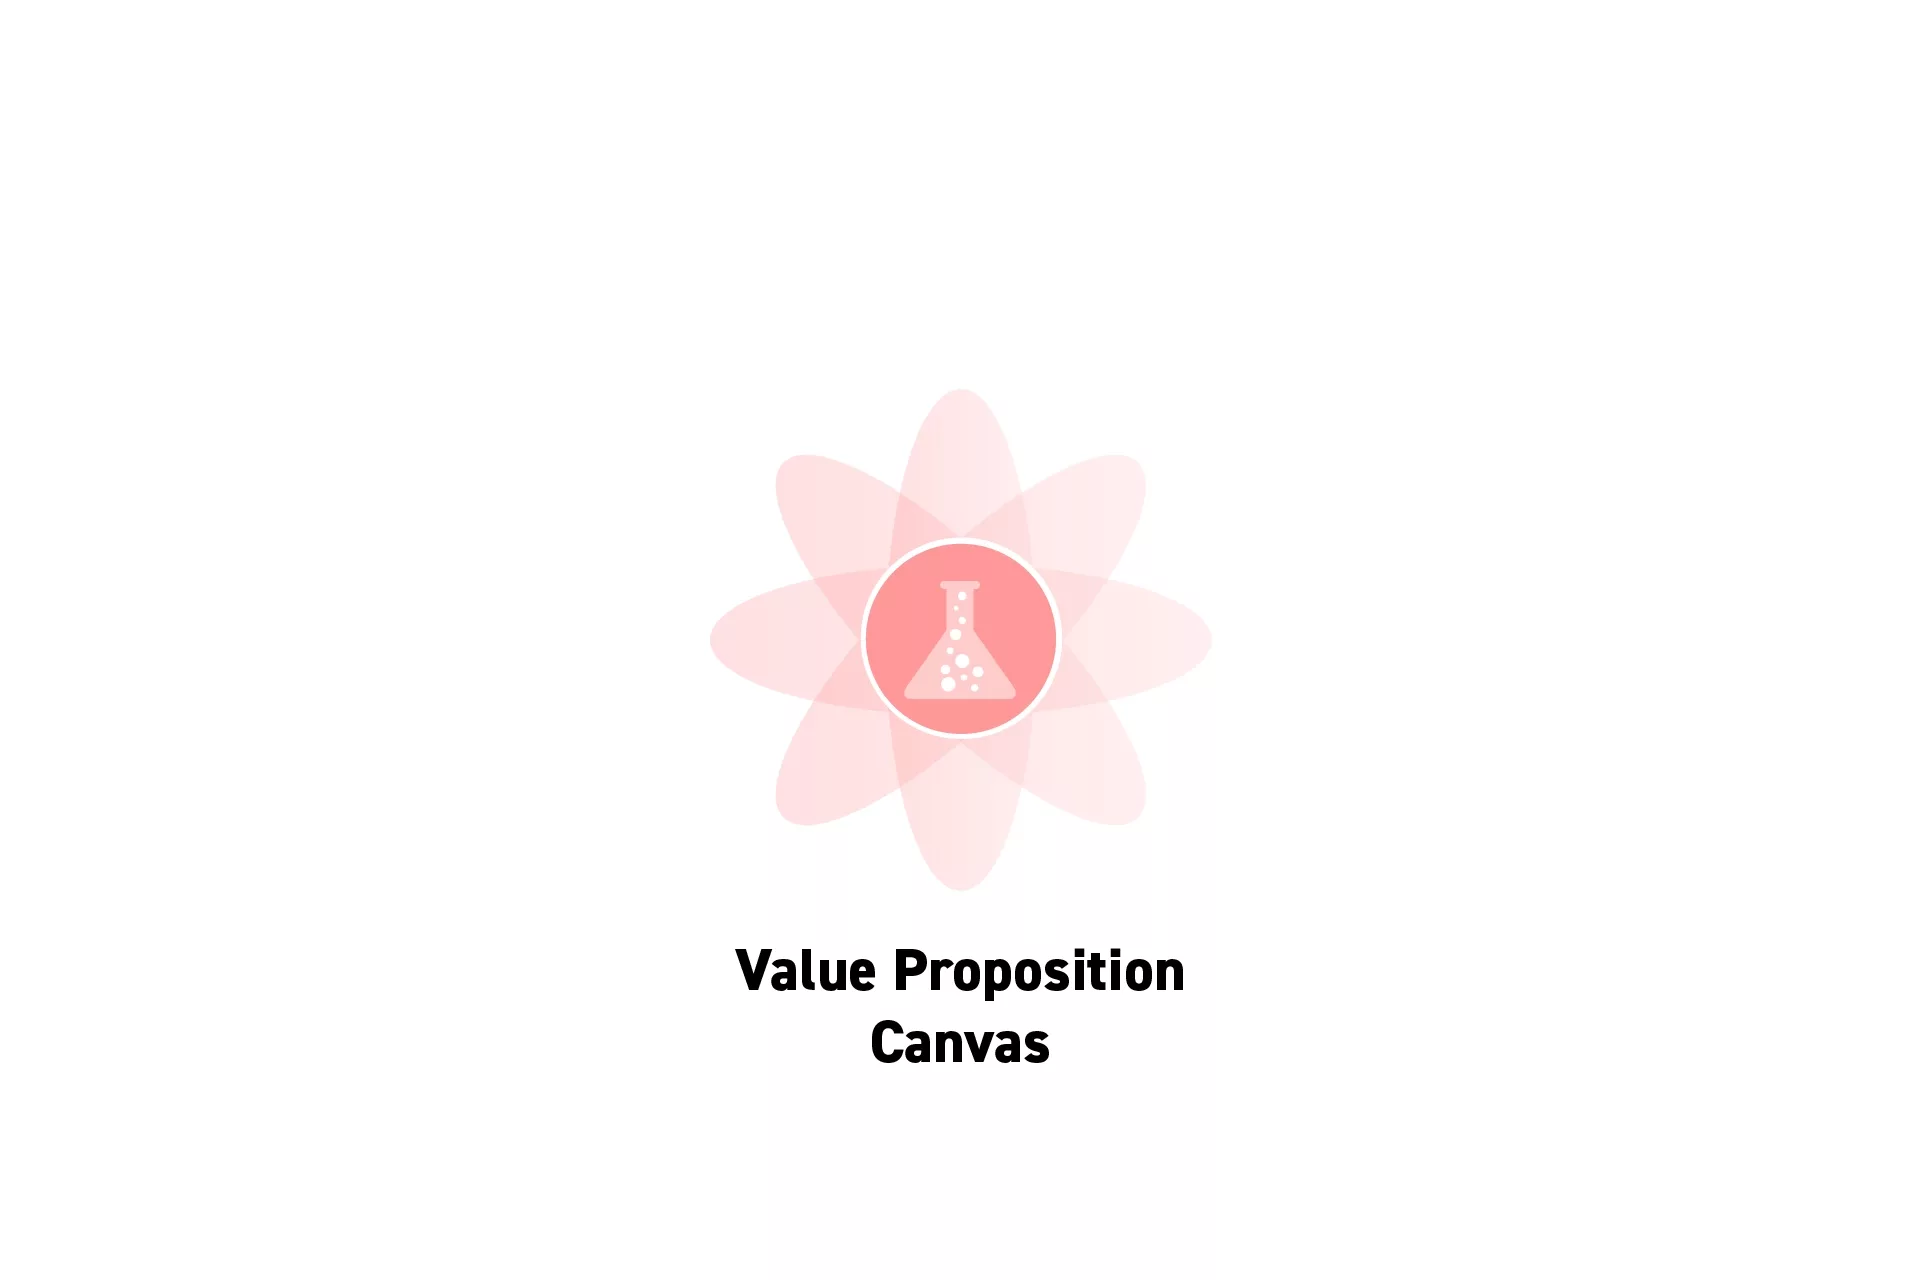 A flower that represents Strategy with the text “Value Proposition Canvas��” beneath it.